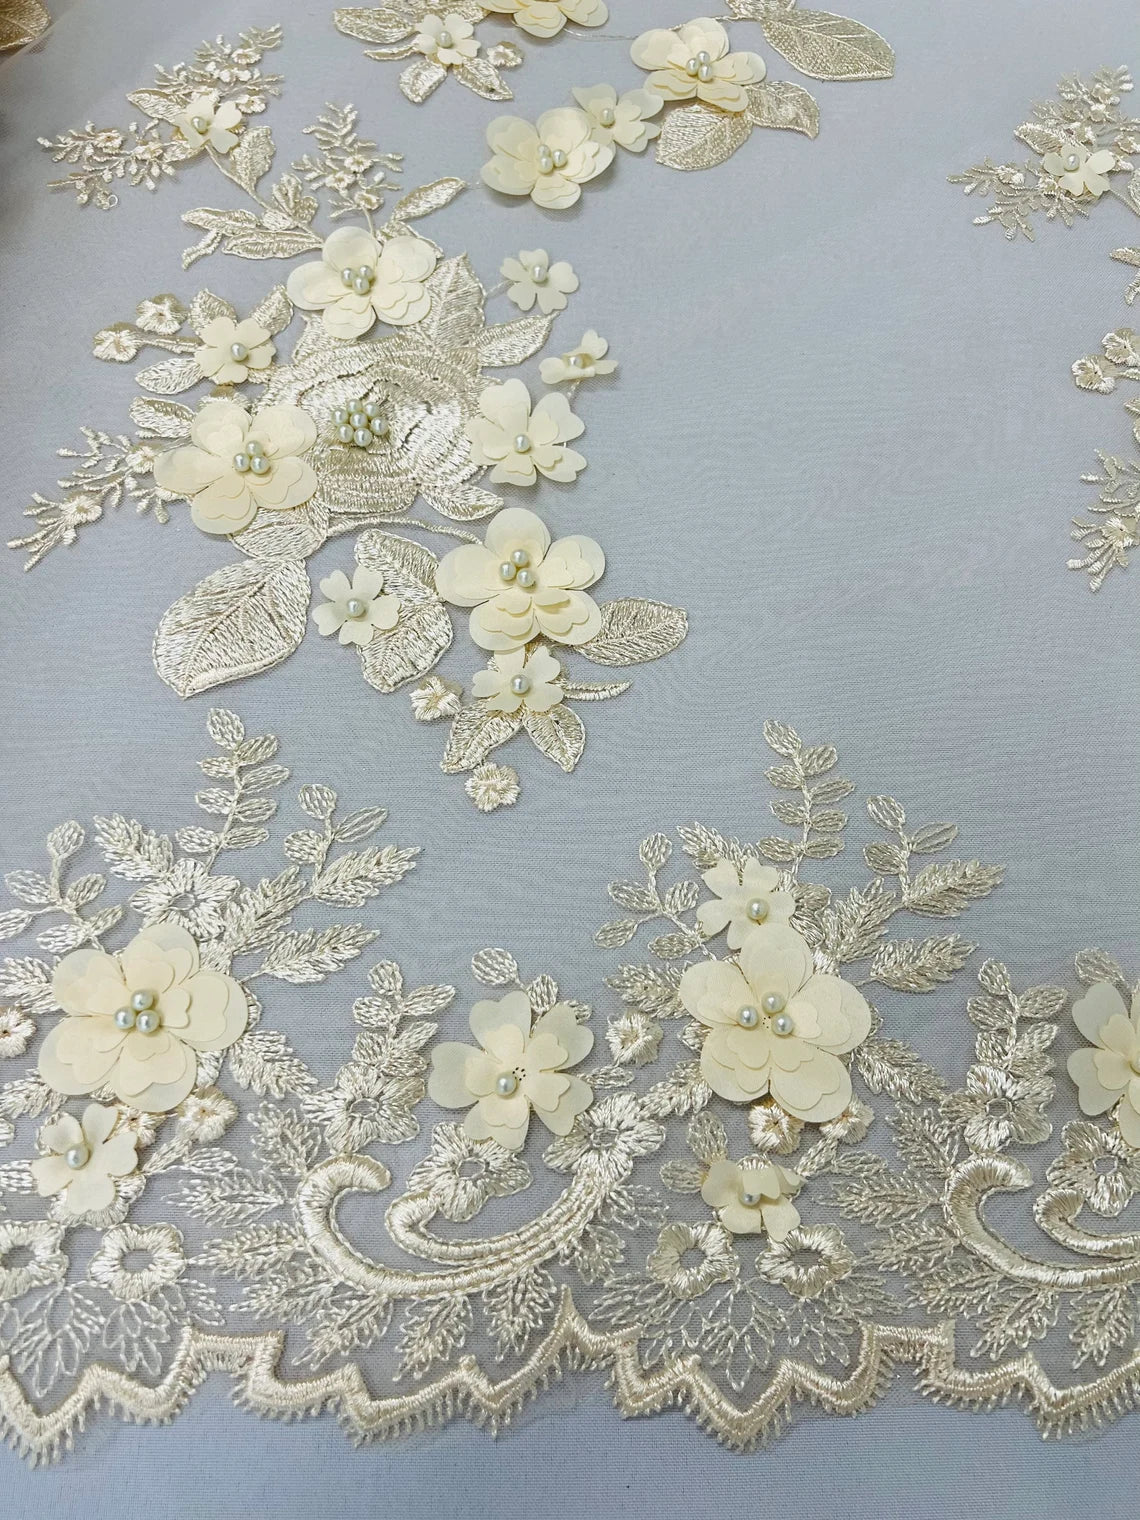 3D Flower Panels Fabric - Champagne - Flower Panels Bead Embroidered on Lace Fabric Sold By Yard